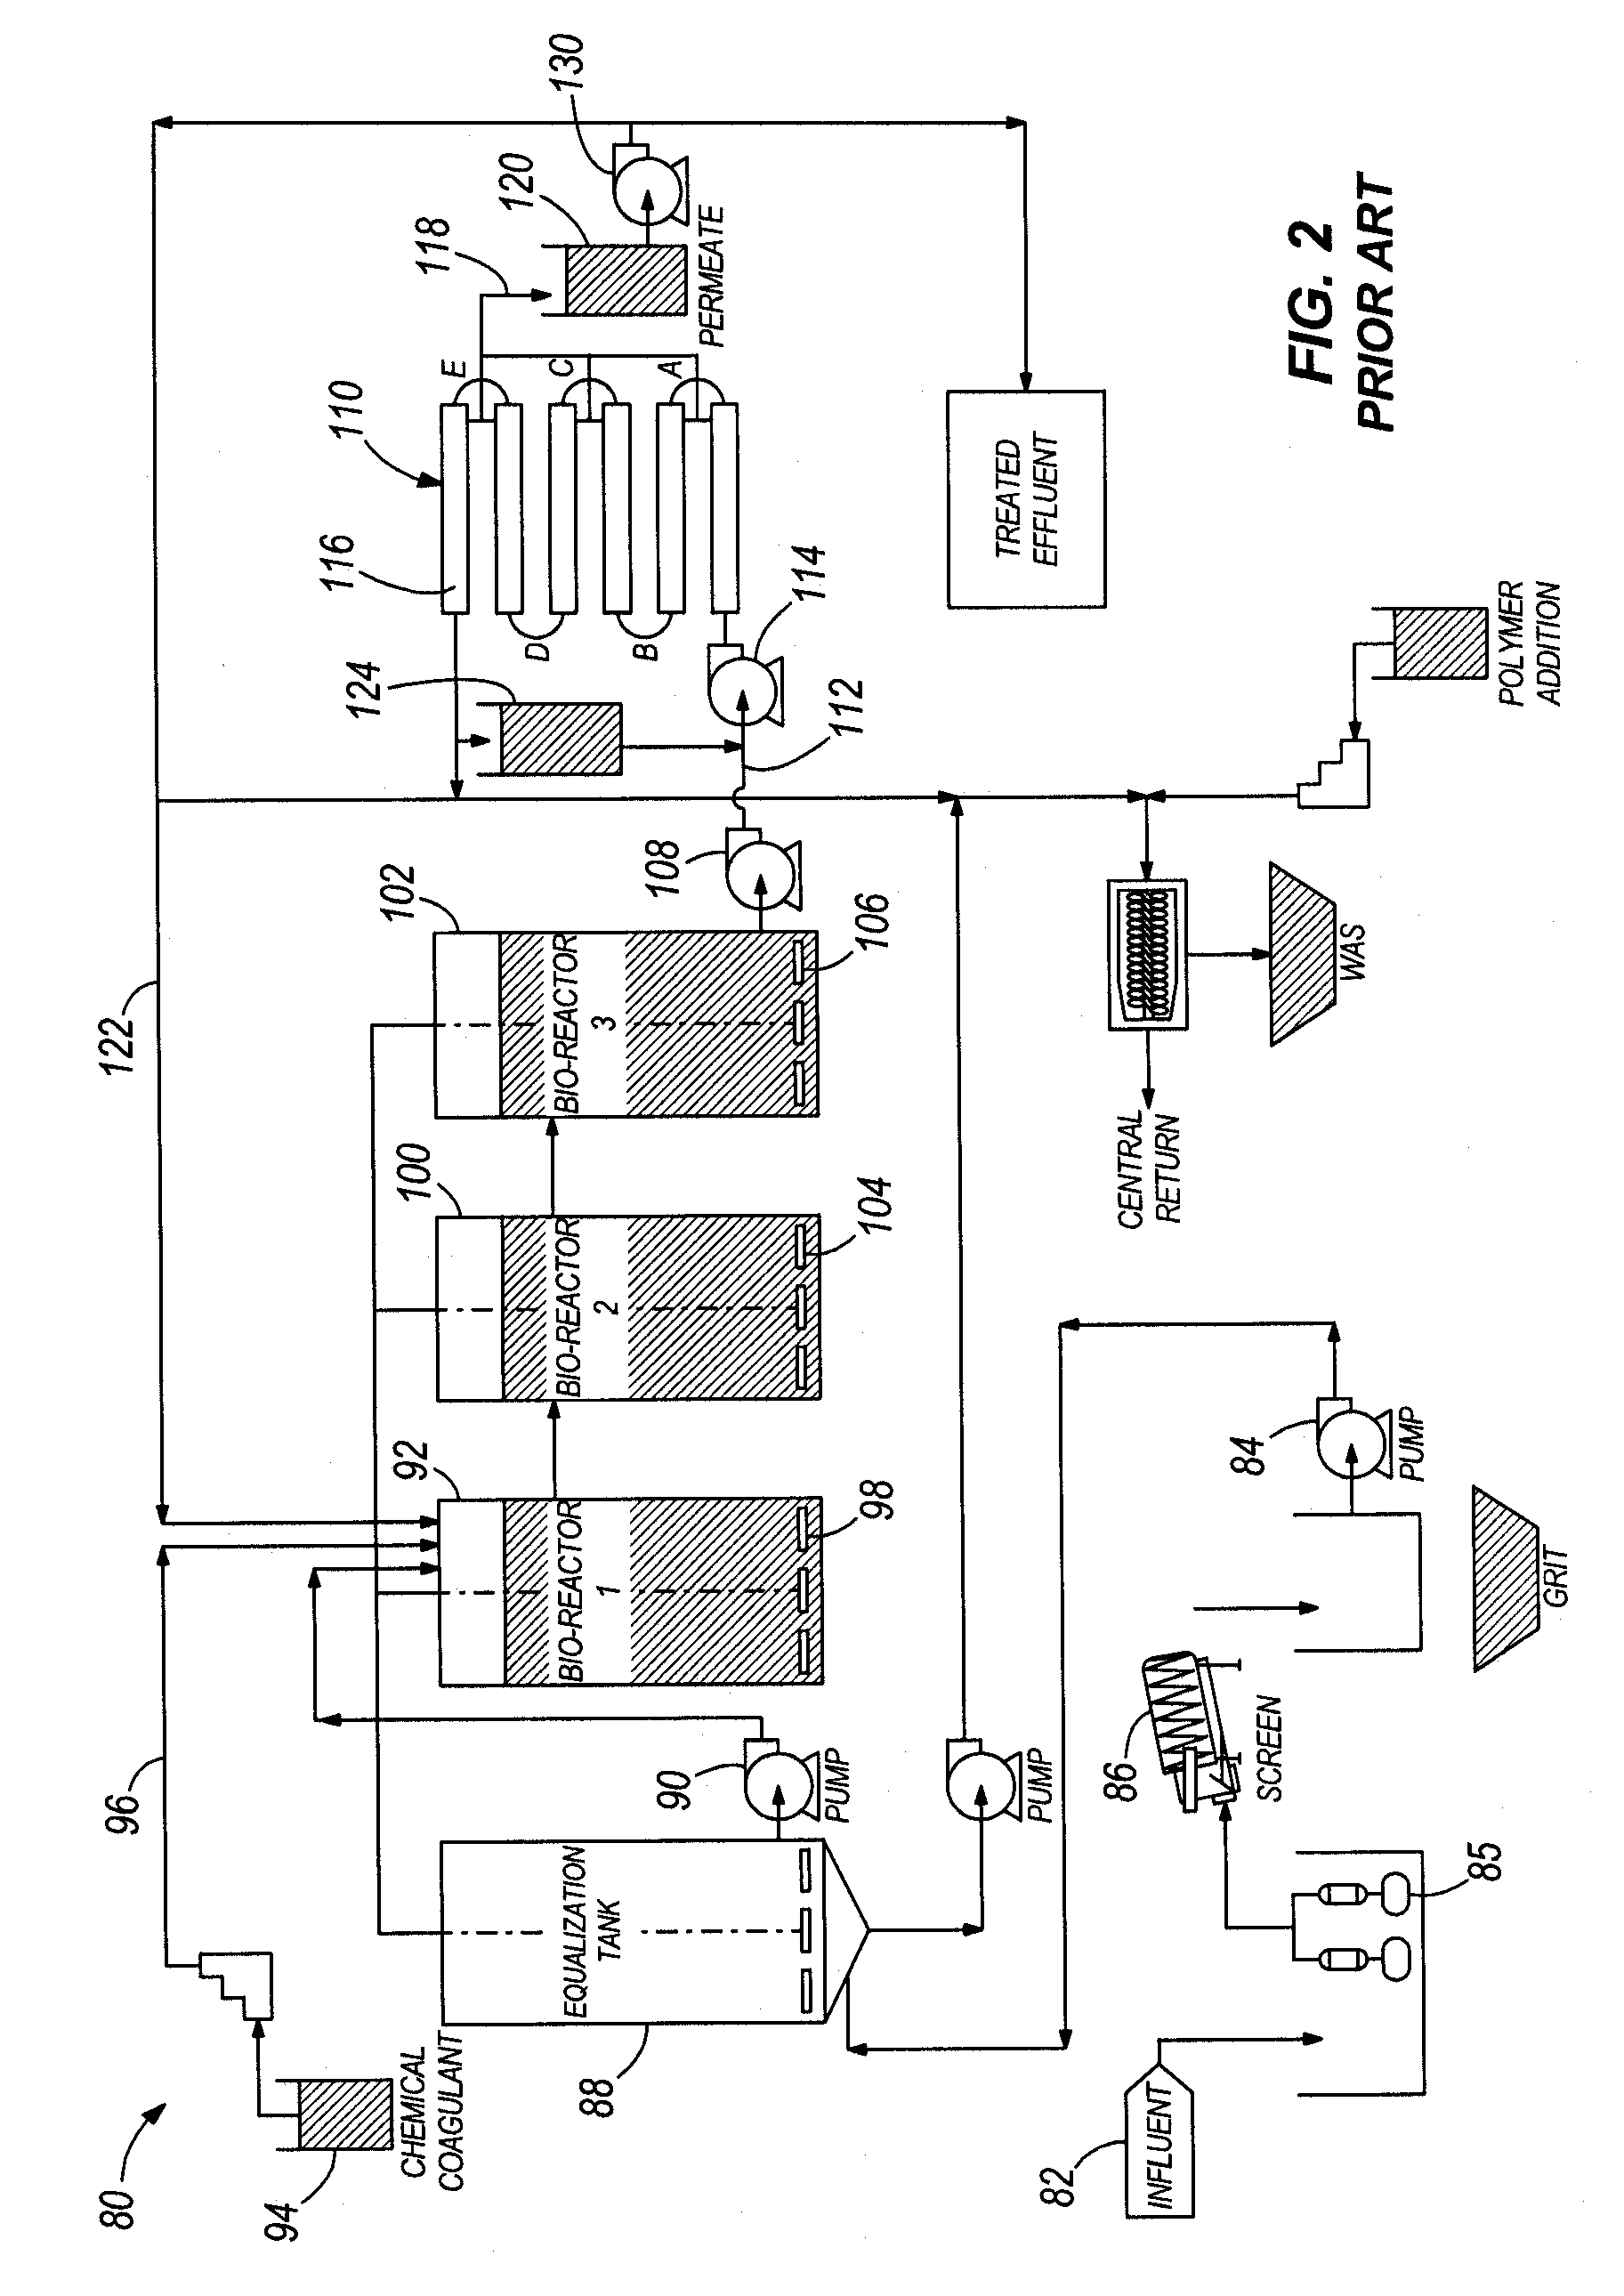 Hydraulically integrated solids/liquid separation system and method for wastewater treatment